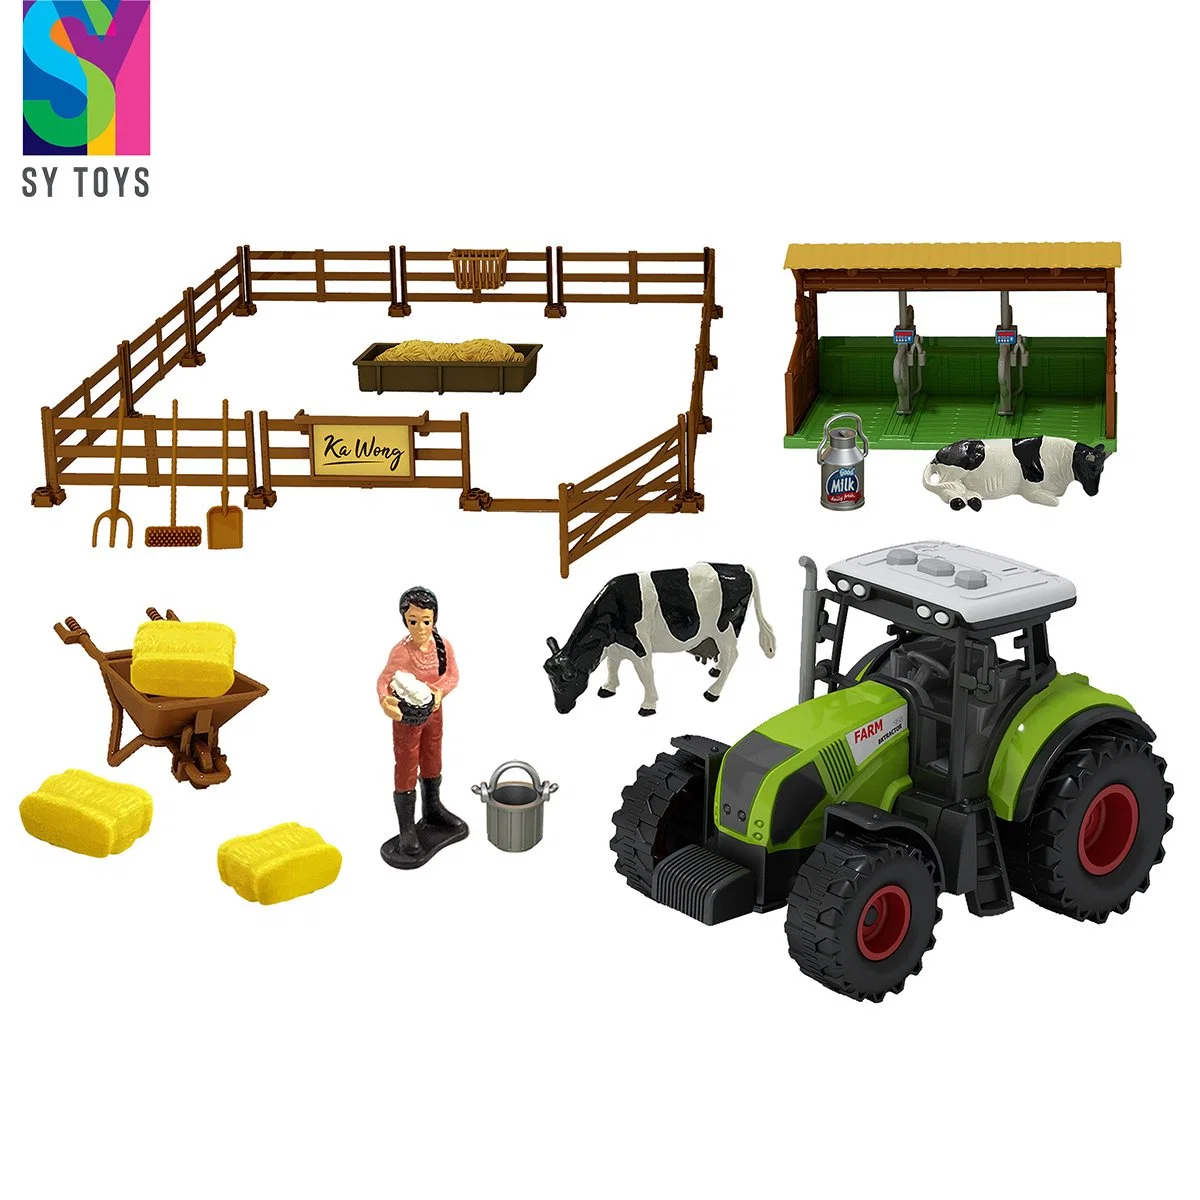 Sy Toys Pretend Play DIY Plastic Small Animal Farm House Tractor Model Toys for Kids